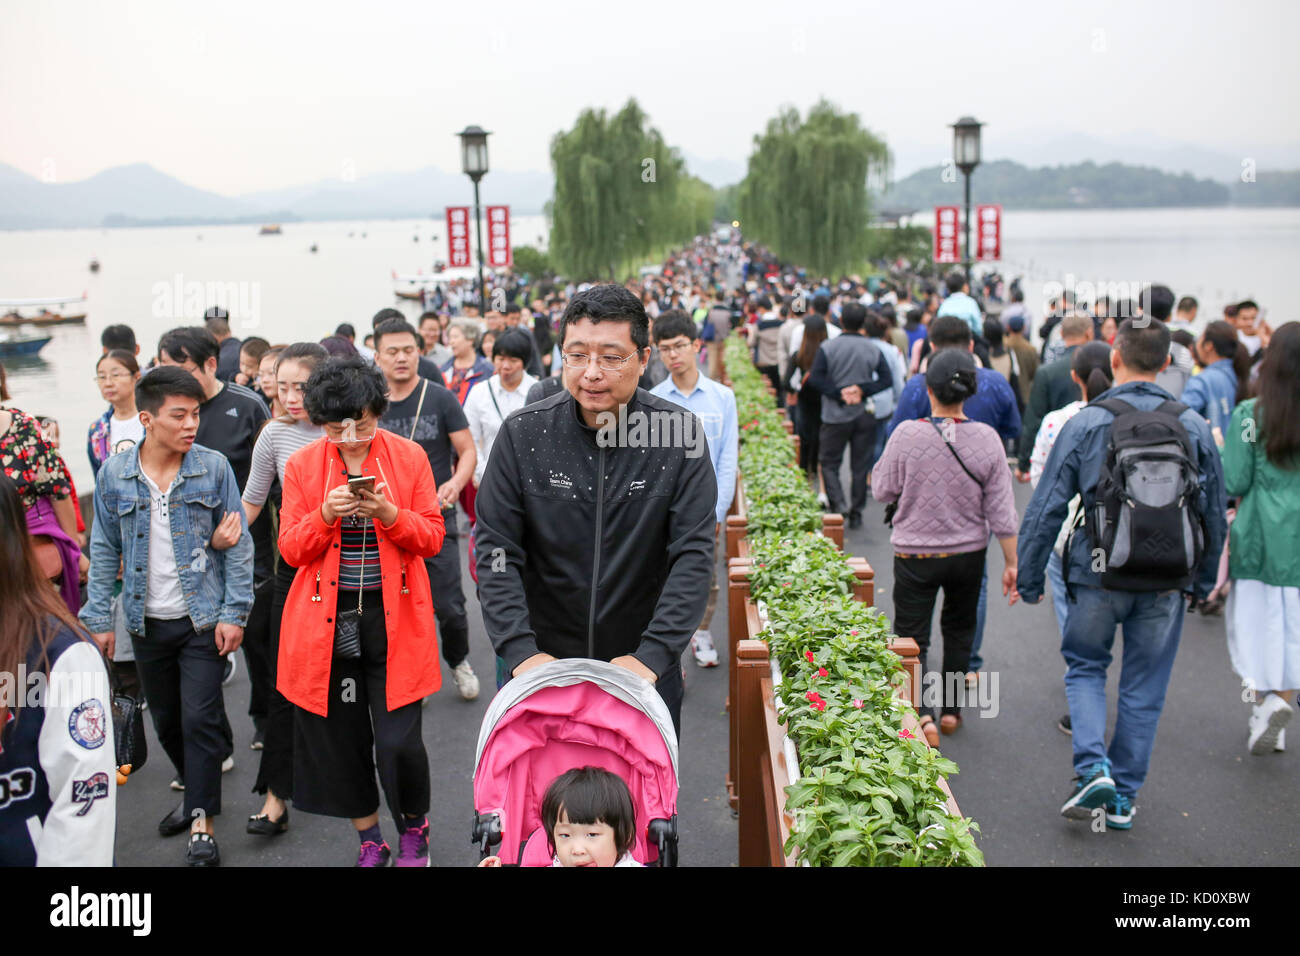 (171009) -- HANGZHOU, Oct. 9, 2017 (Xinhua) -- Tourists visit the Duanqiao Bridge, or the Broken Bridge, in the West Lake scenic area in Hangzhou, capital of east China's Zhejiang Province, Oct. 5, 2017. A total of 705 million tourists traveled around the country during the National holiday, generating 583.6 billion yuan (about 87.7 billion U.S. dollars) of revenue, according to the China National Tourism Administration (CNTA). This year the National Day holiday was extended by one day as the Mid-Autumn Festival fell on Oct.4, which saw a surge in tourist revenue along with passenger flows. (X Stock Photo